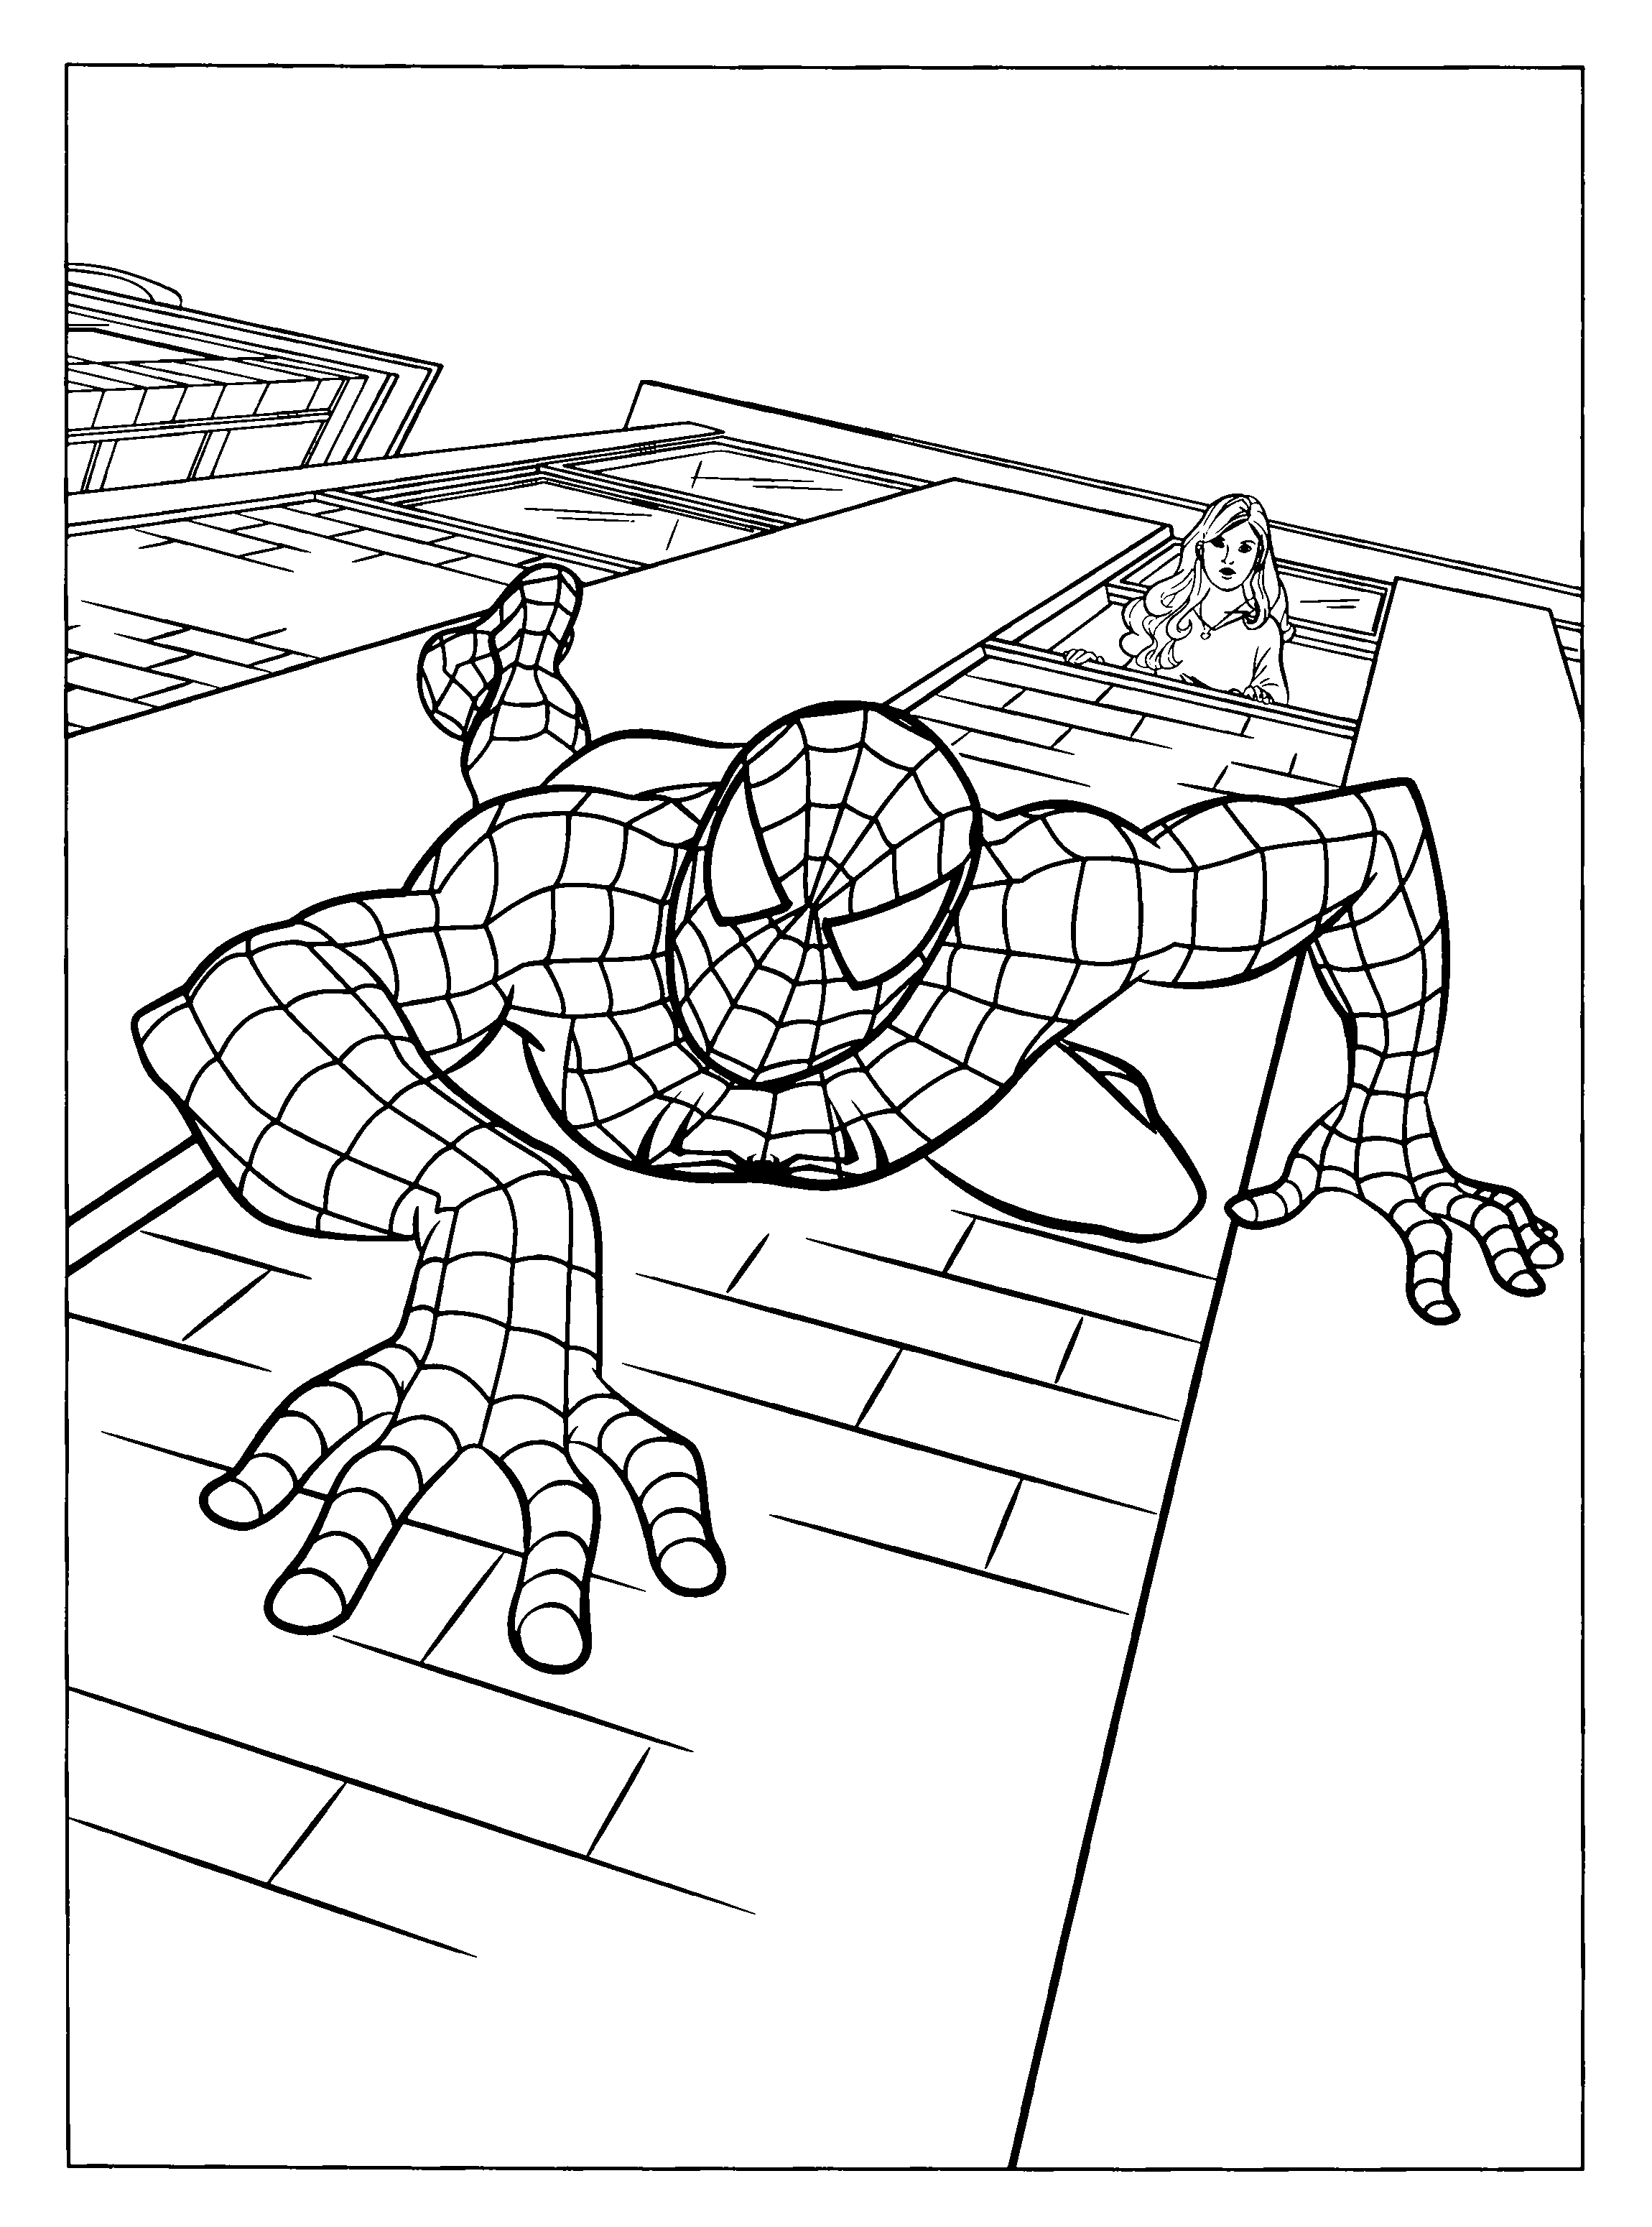 Spiderman Coloring pages | Coloring page | FREE Coloring pages for kids | #20